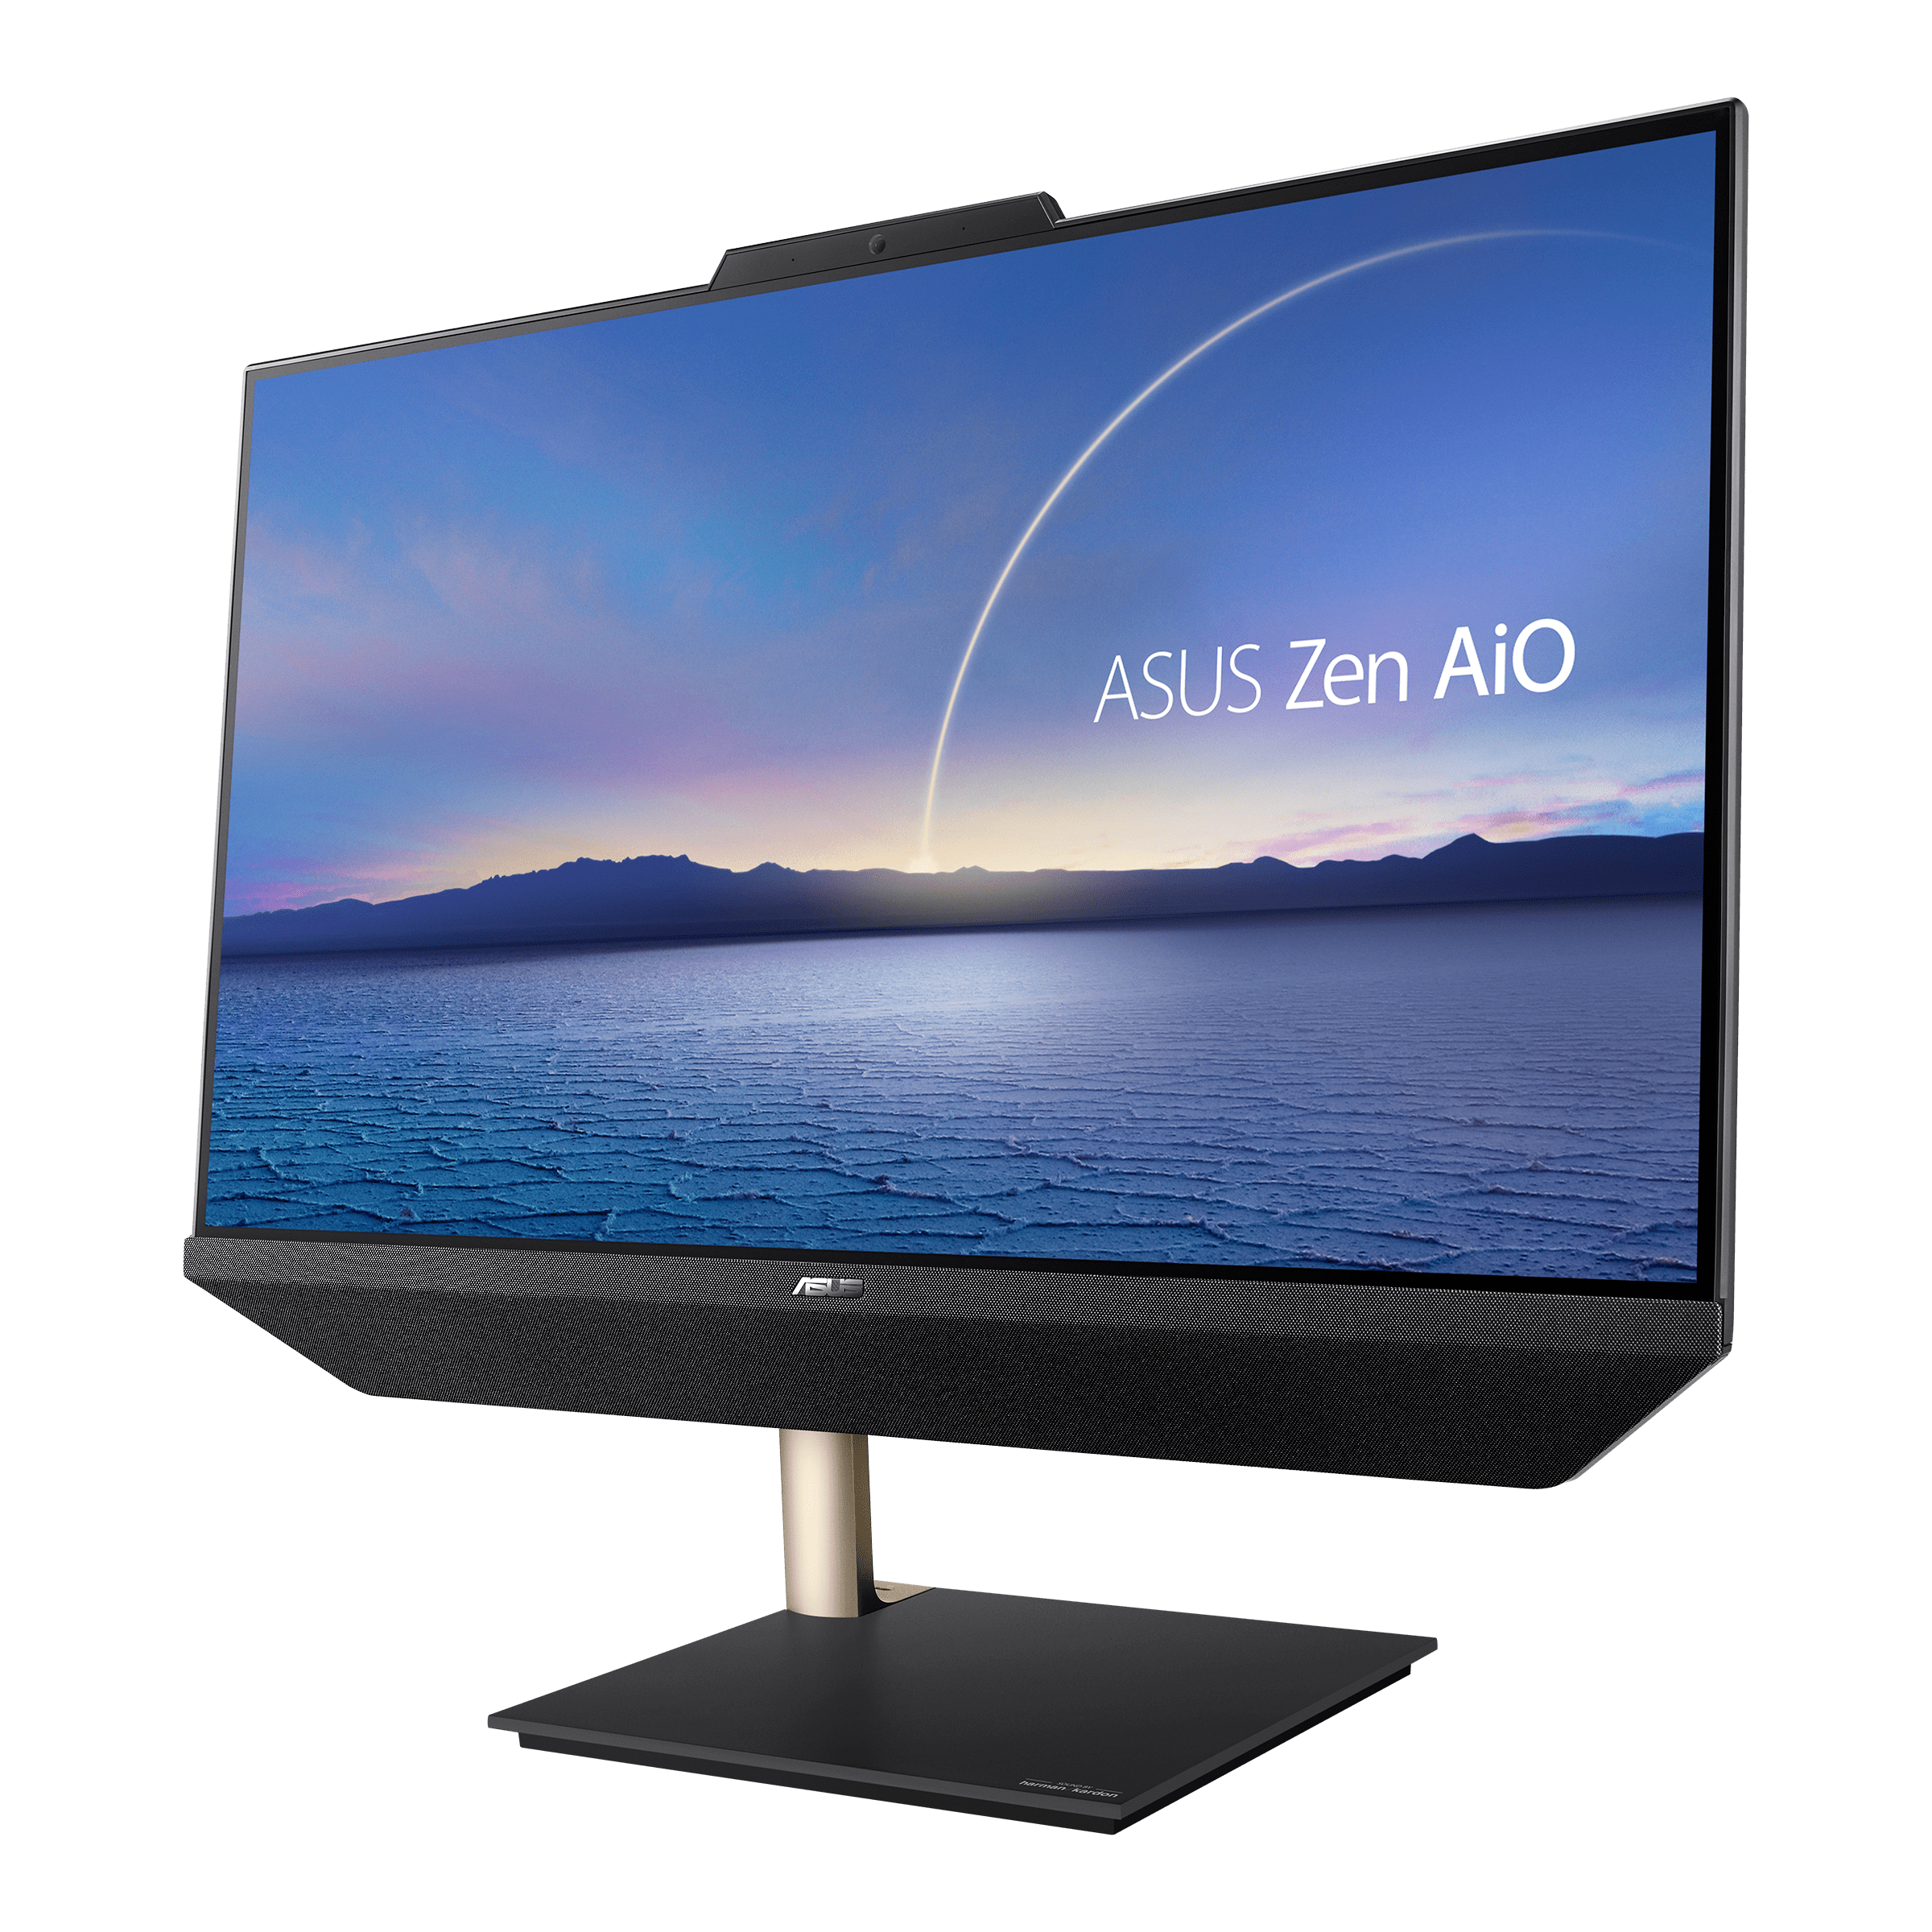 Zen AiO 24 M5401｜All-in-One PCs｜ASUS Global